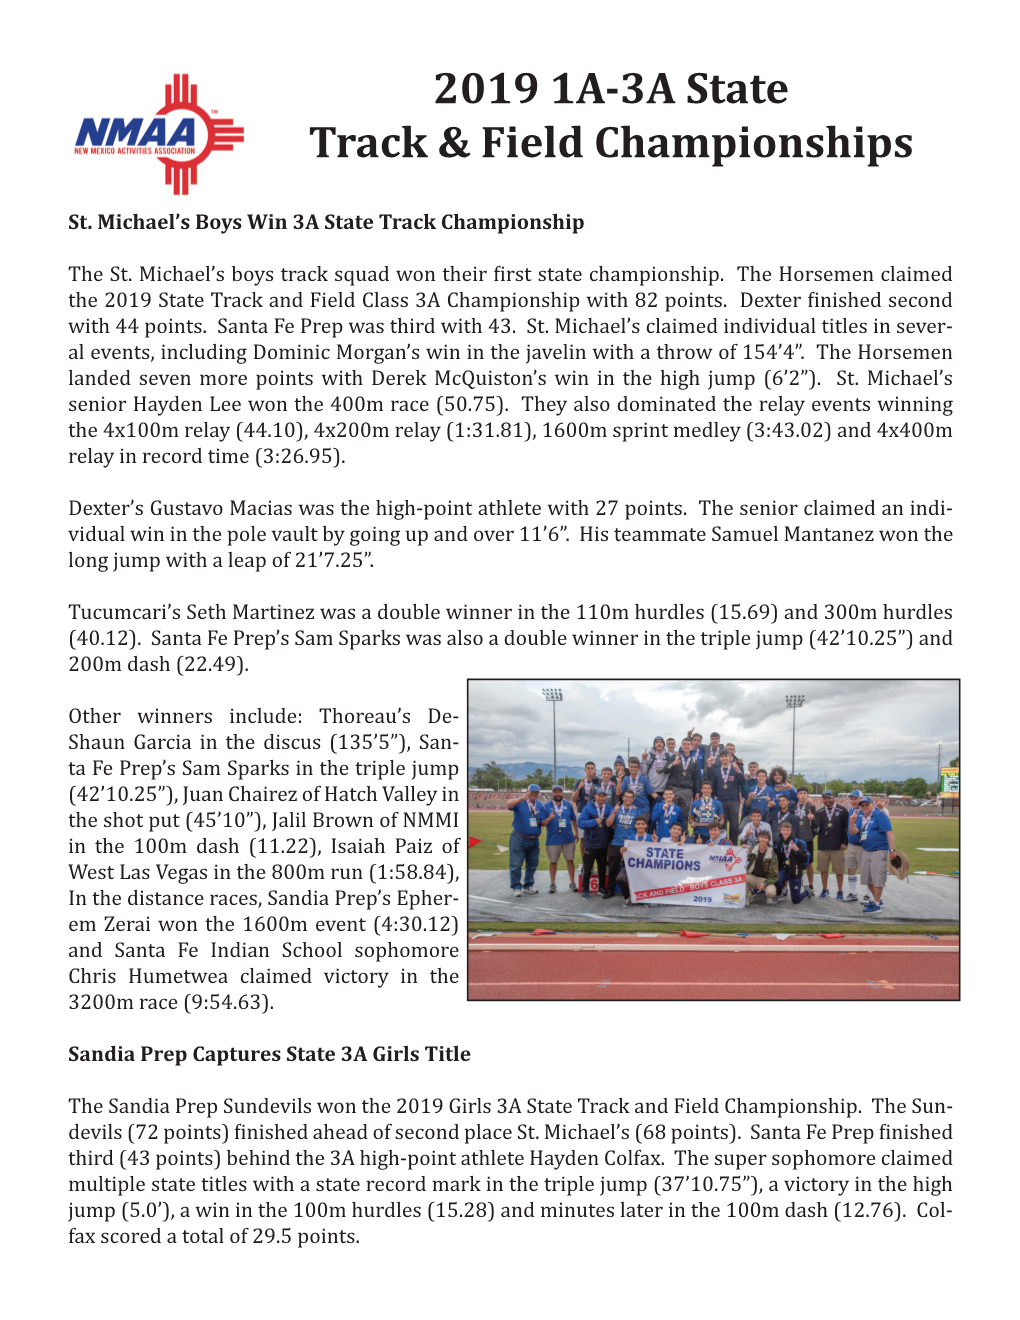 2019 1A-3A State Track & Field Championships